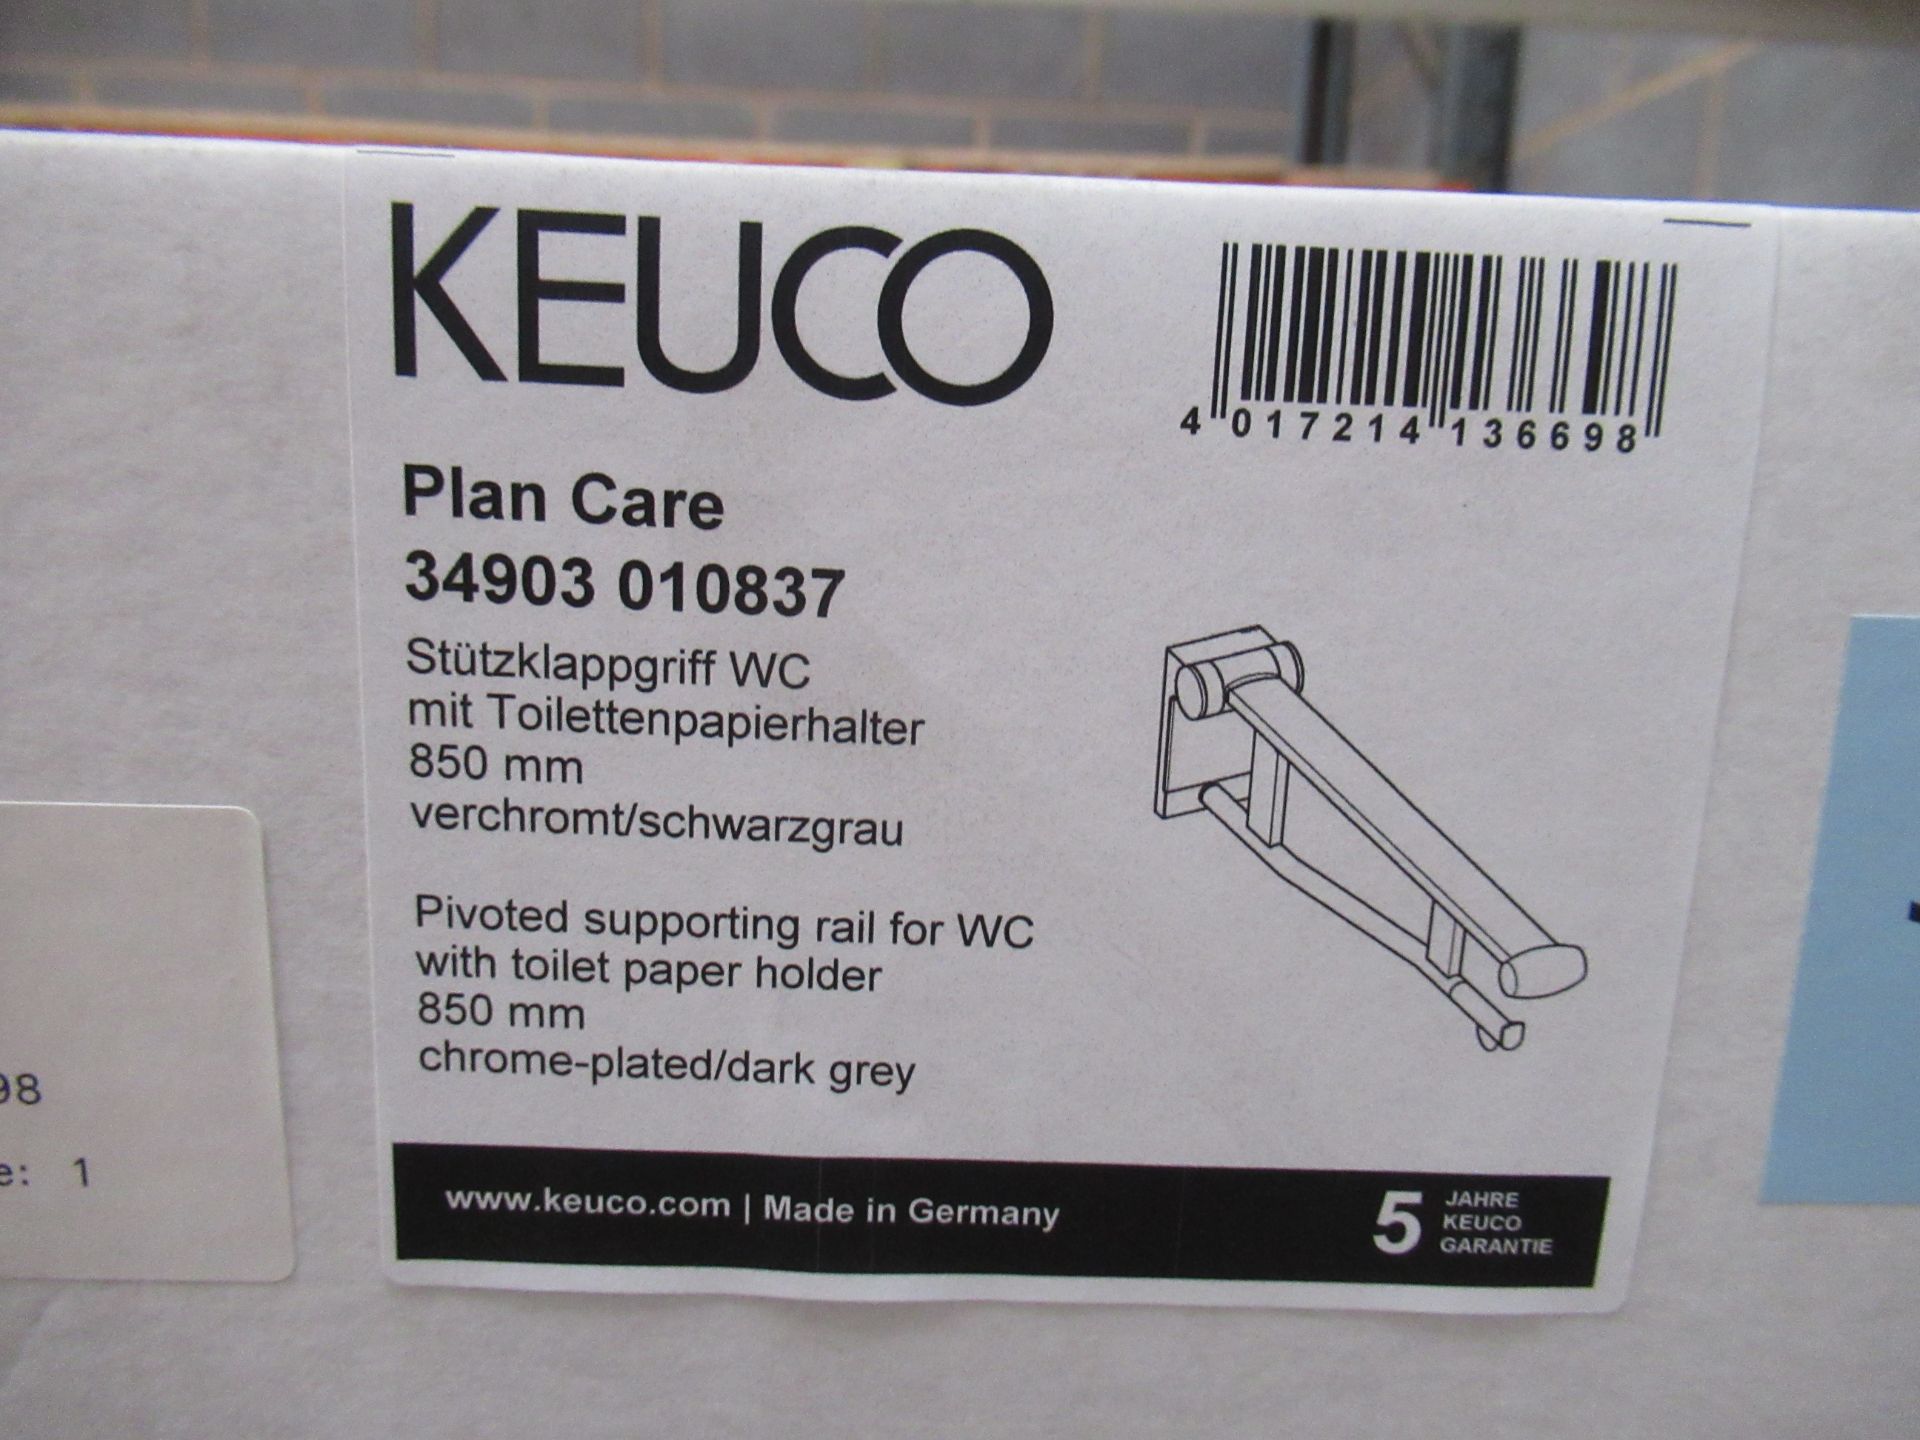 2 x Keuco Plan Care Pivoted Support Rail for W.C Chrome Plated/Dark Grey, P/N 34903-010837 - Image 2 of 2